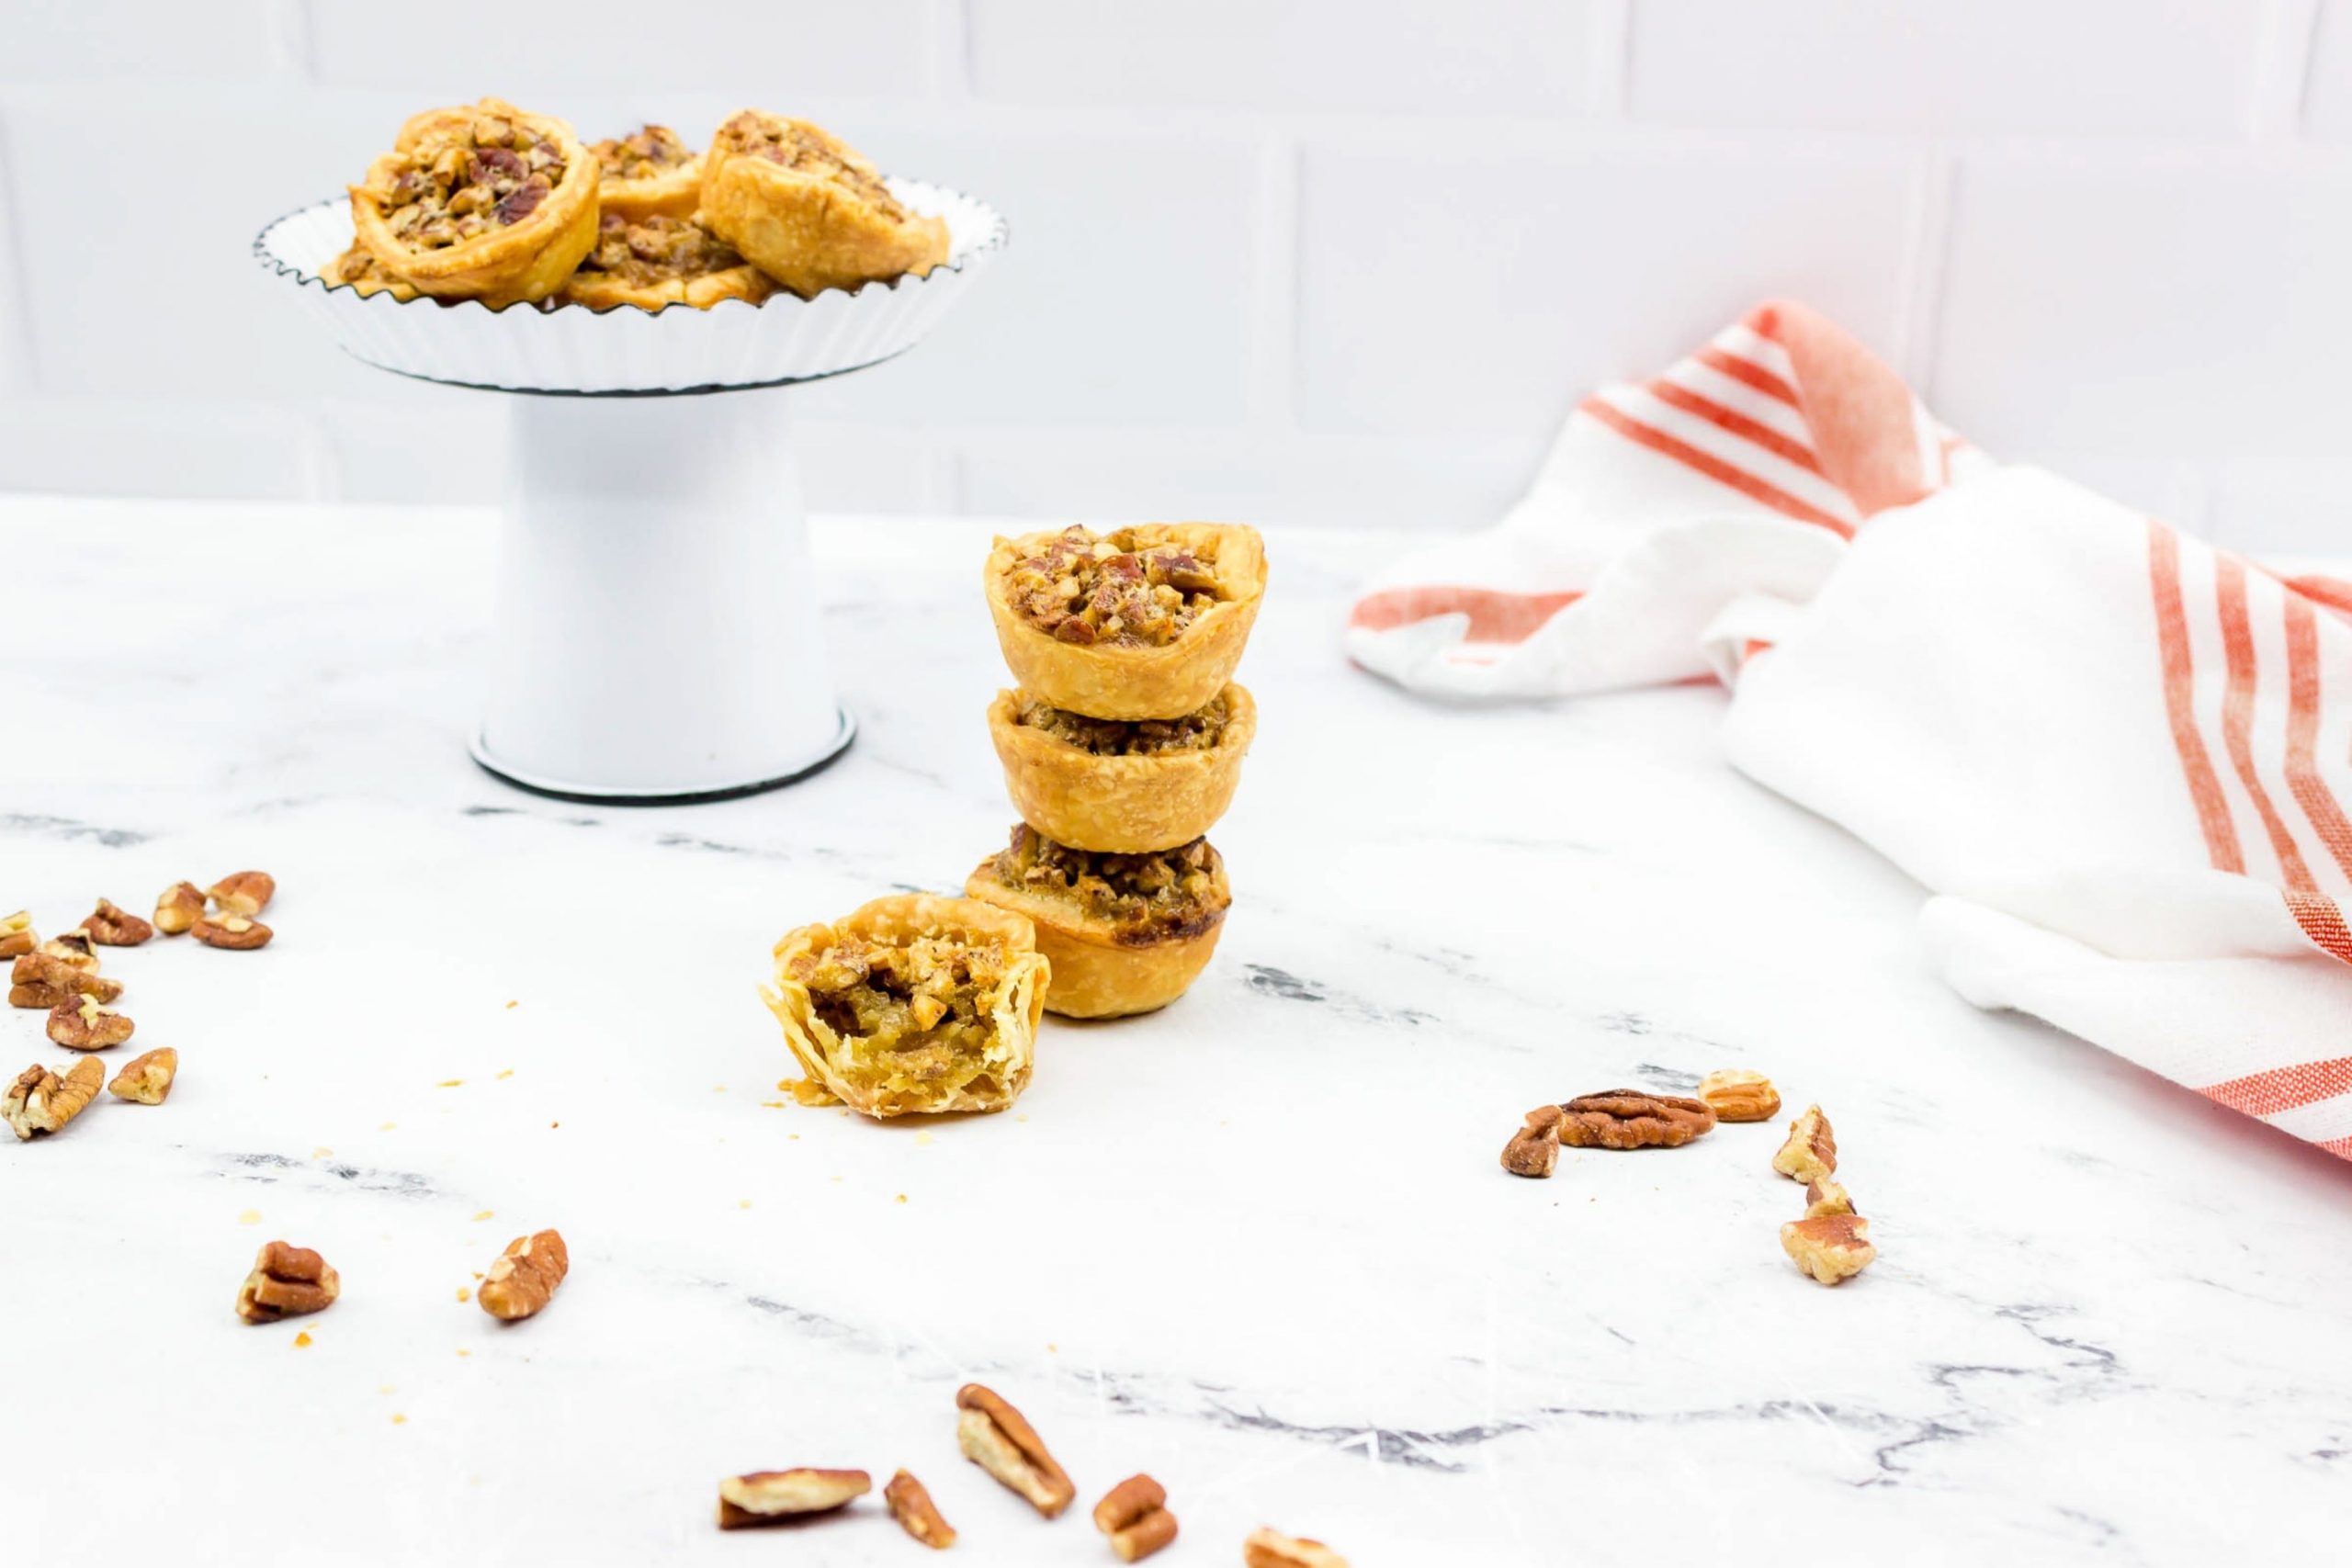 How To Make Pecan Tassies Without Cream Cheese